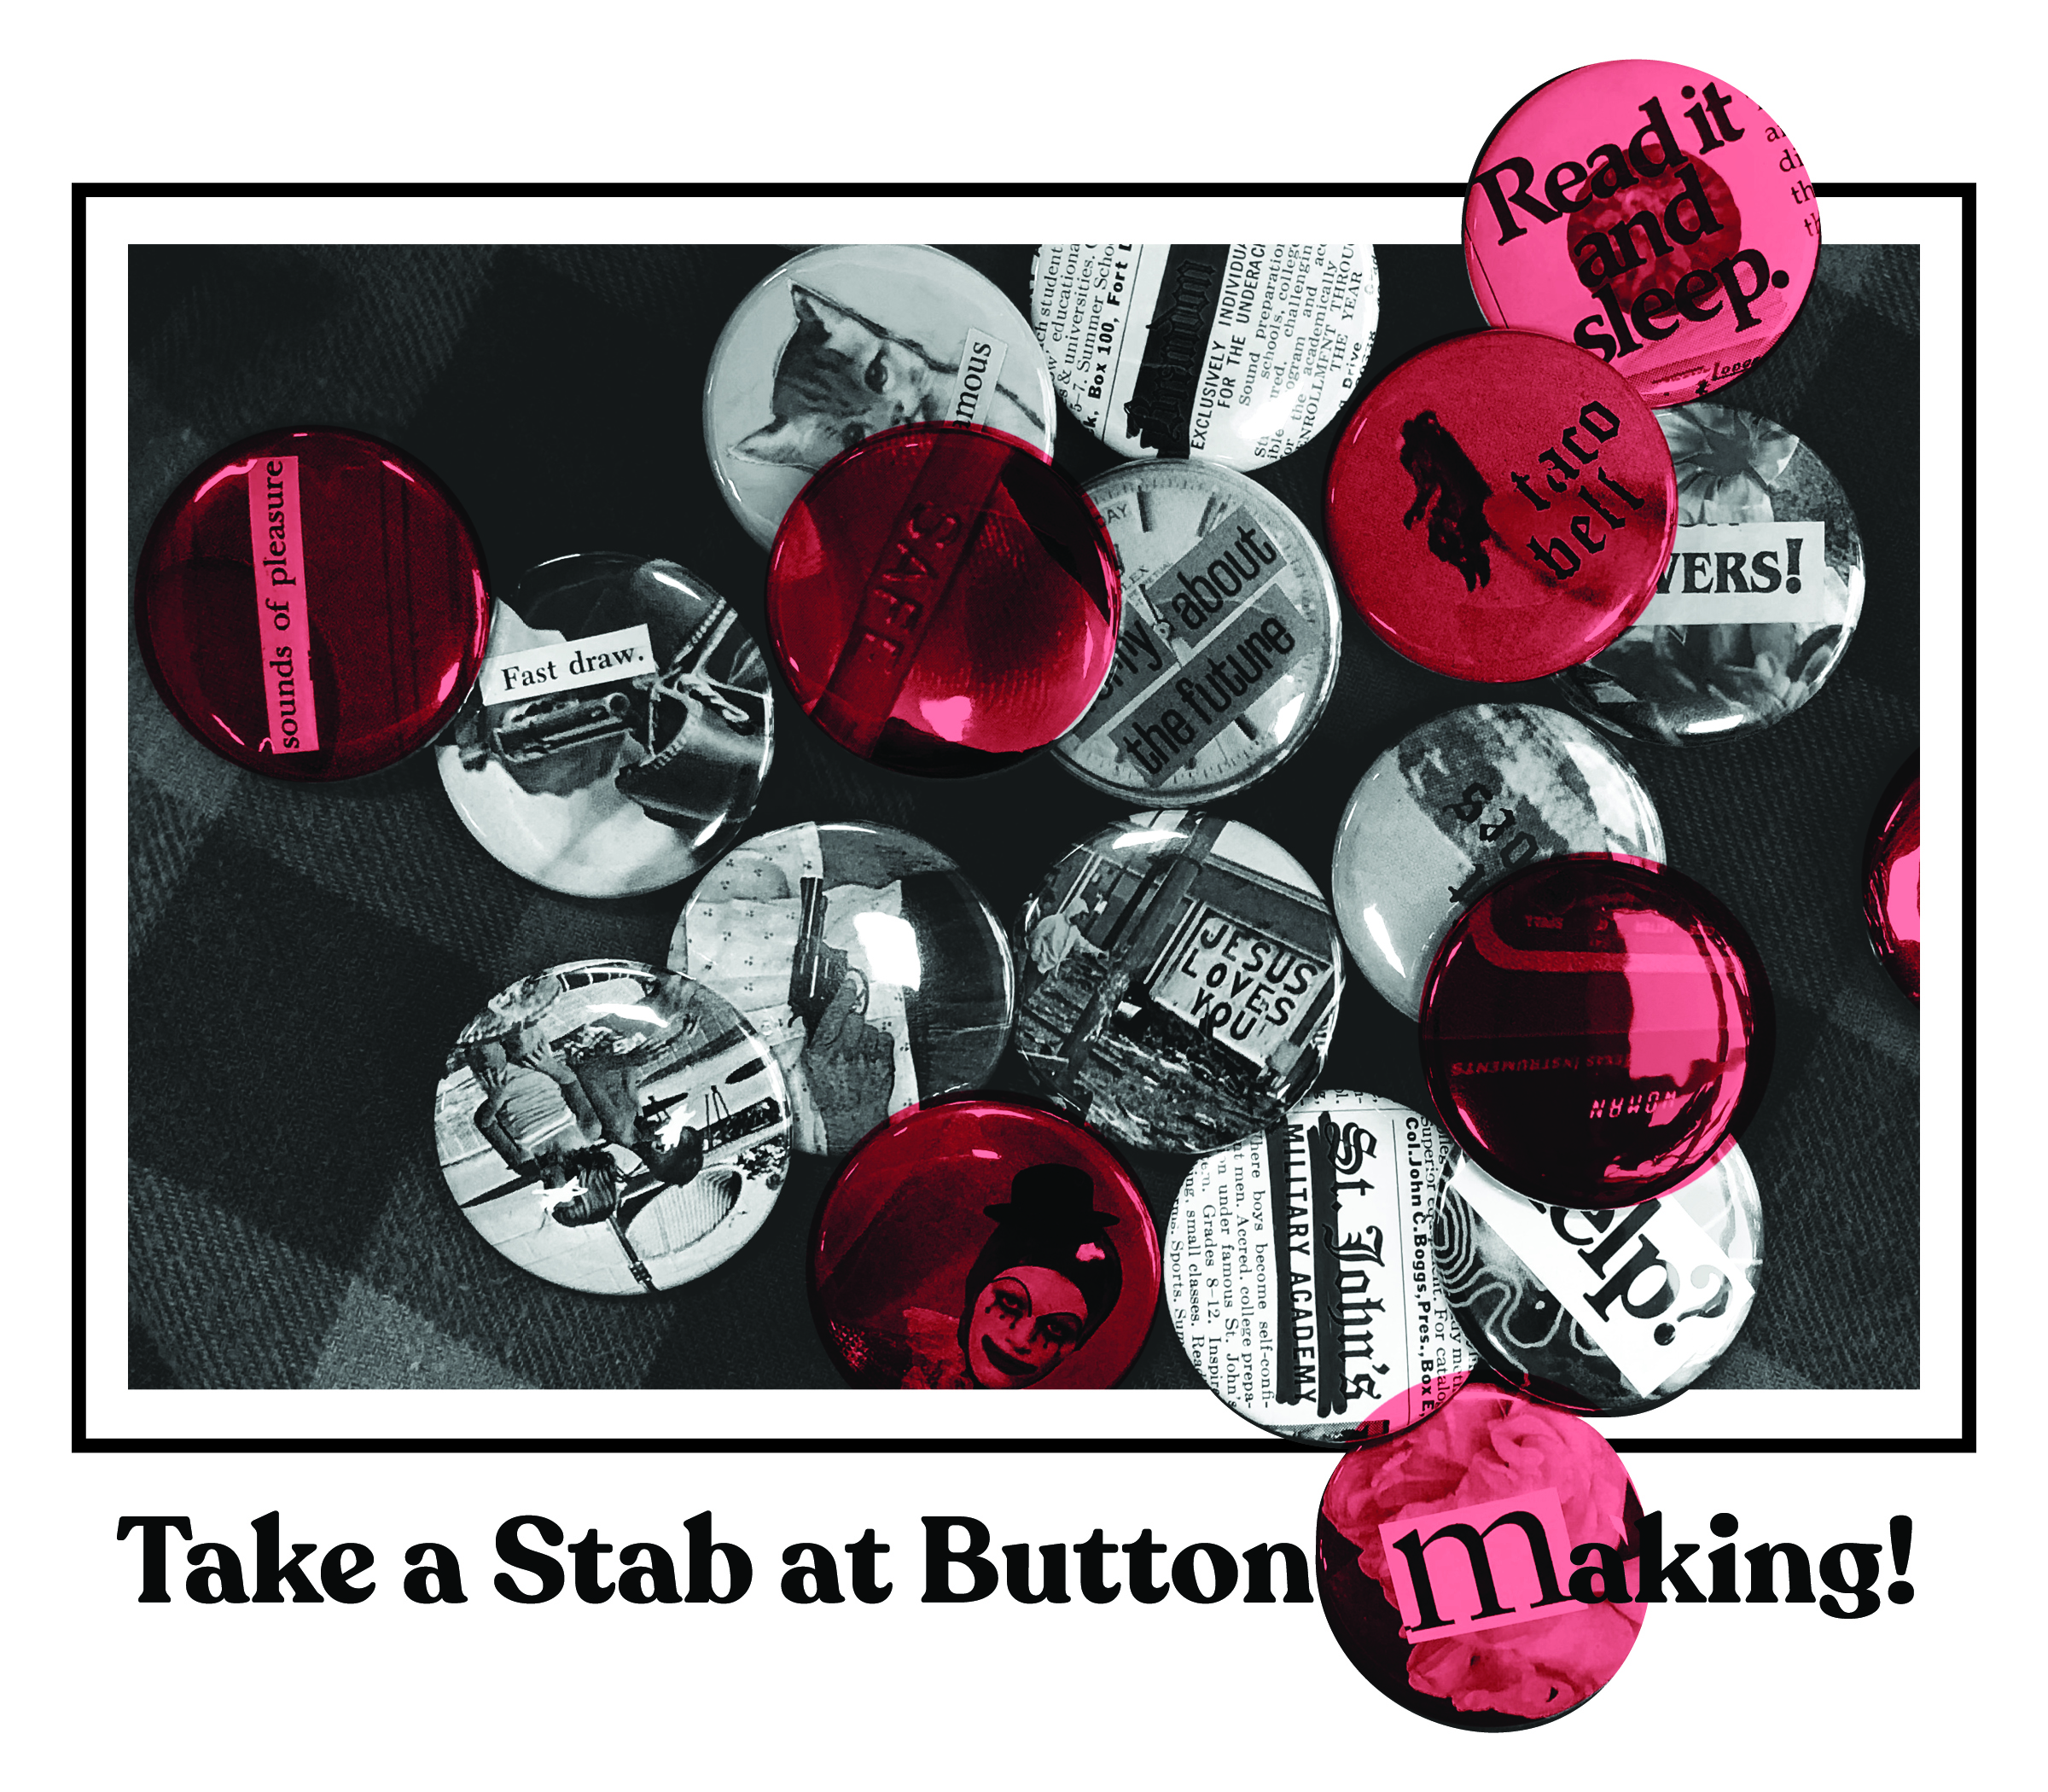 Take A Stab at Button Making (Picture has various buttons in black and white with some in red against a black background). 